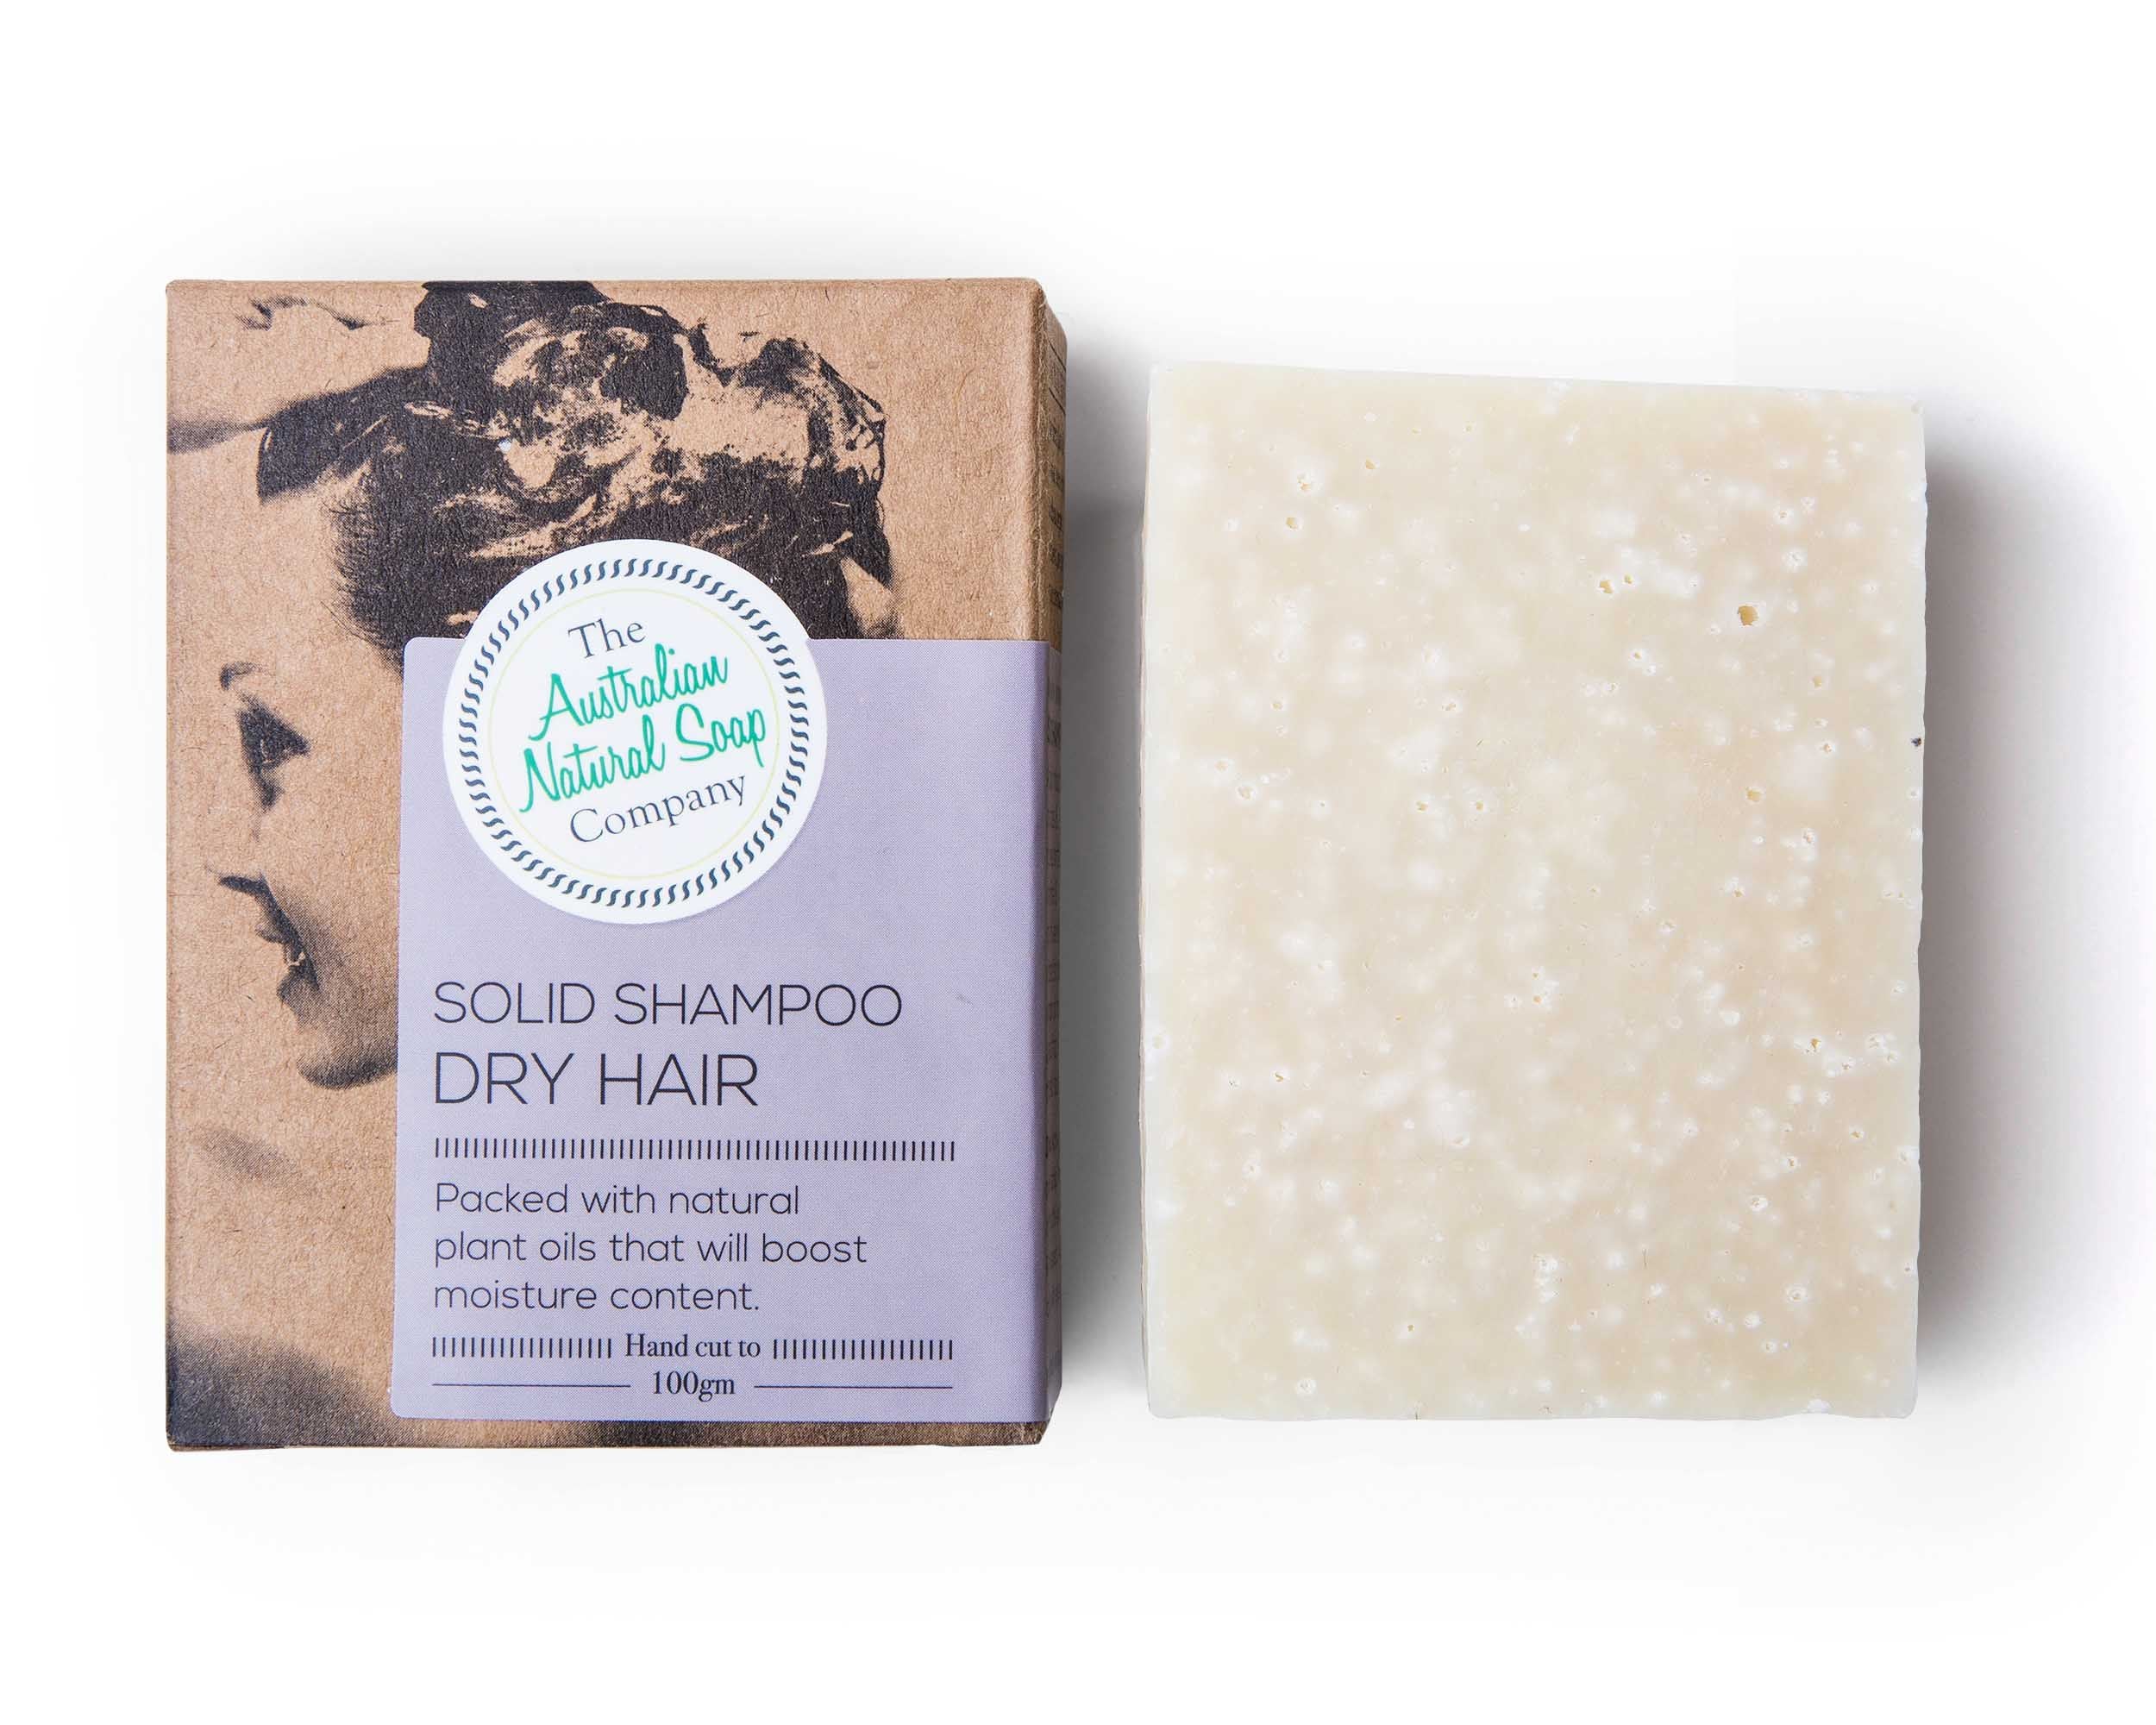 Heritage Solid Shampoo Bar for Dry Hair